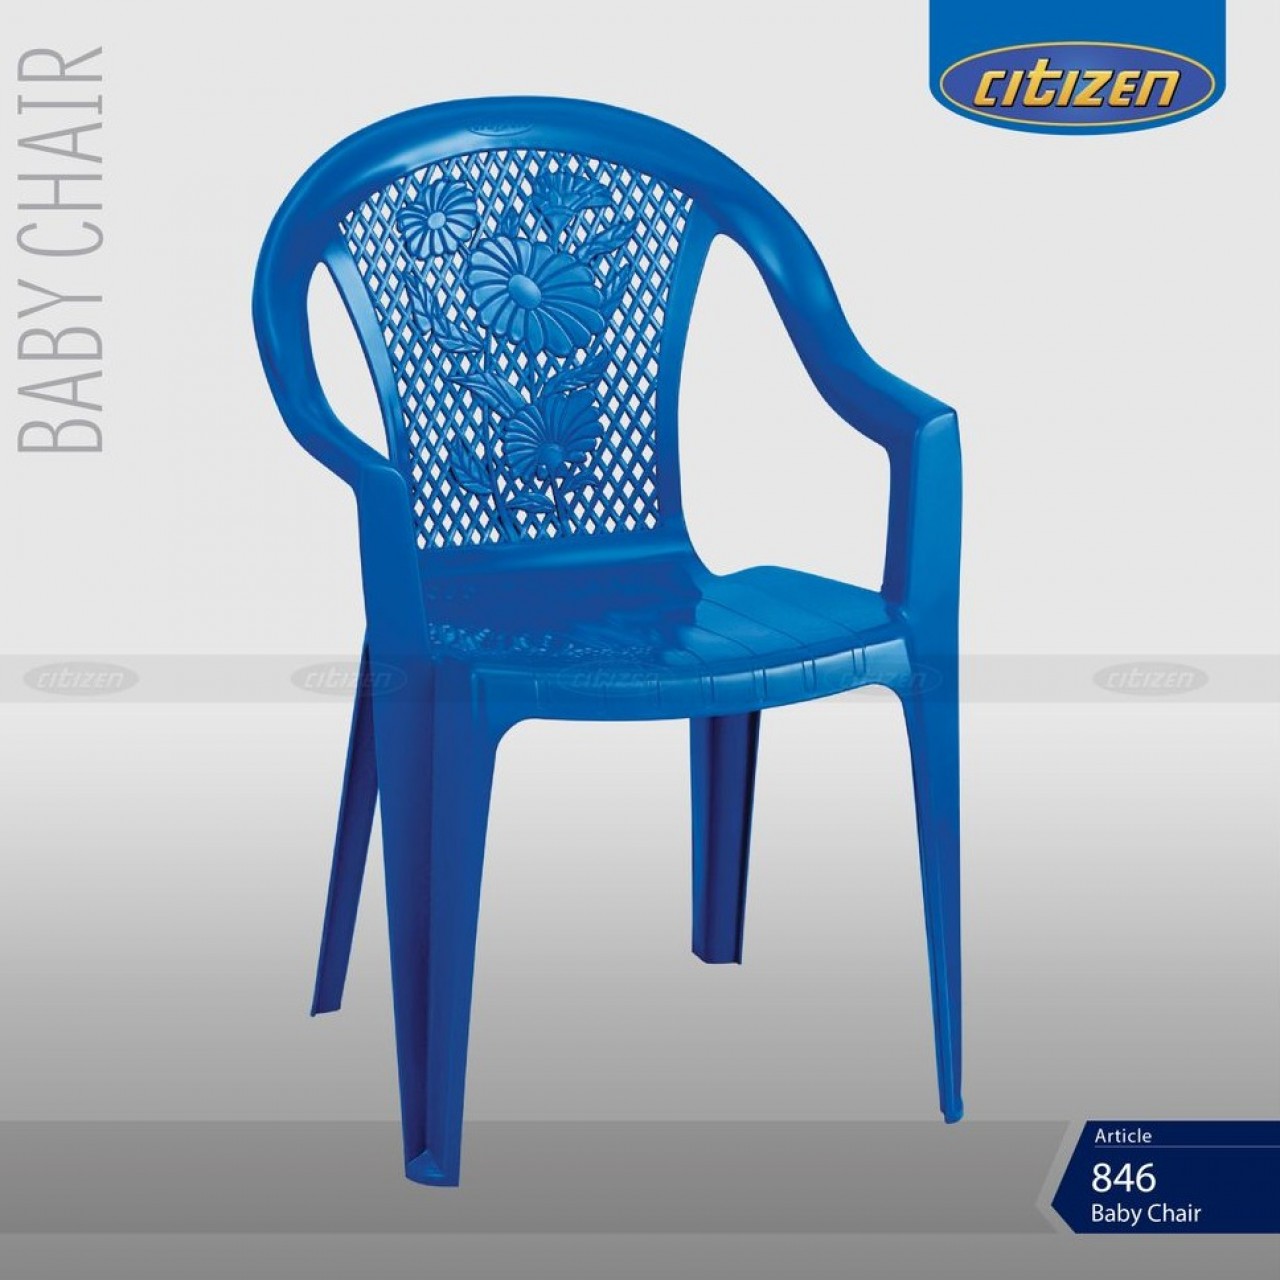 Citizen 846 Plastic Baby Chair - Kids Home Furniture